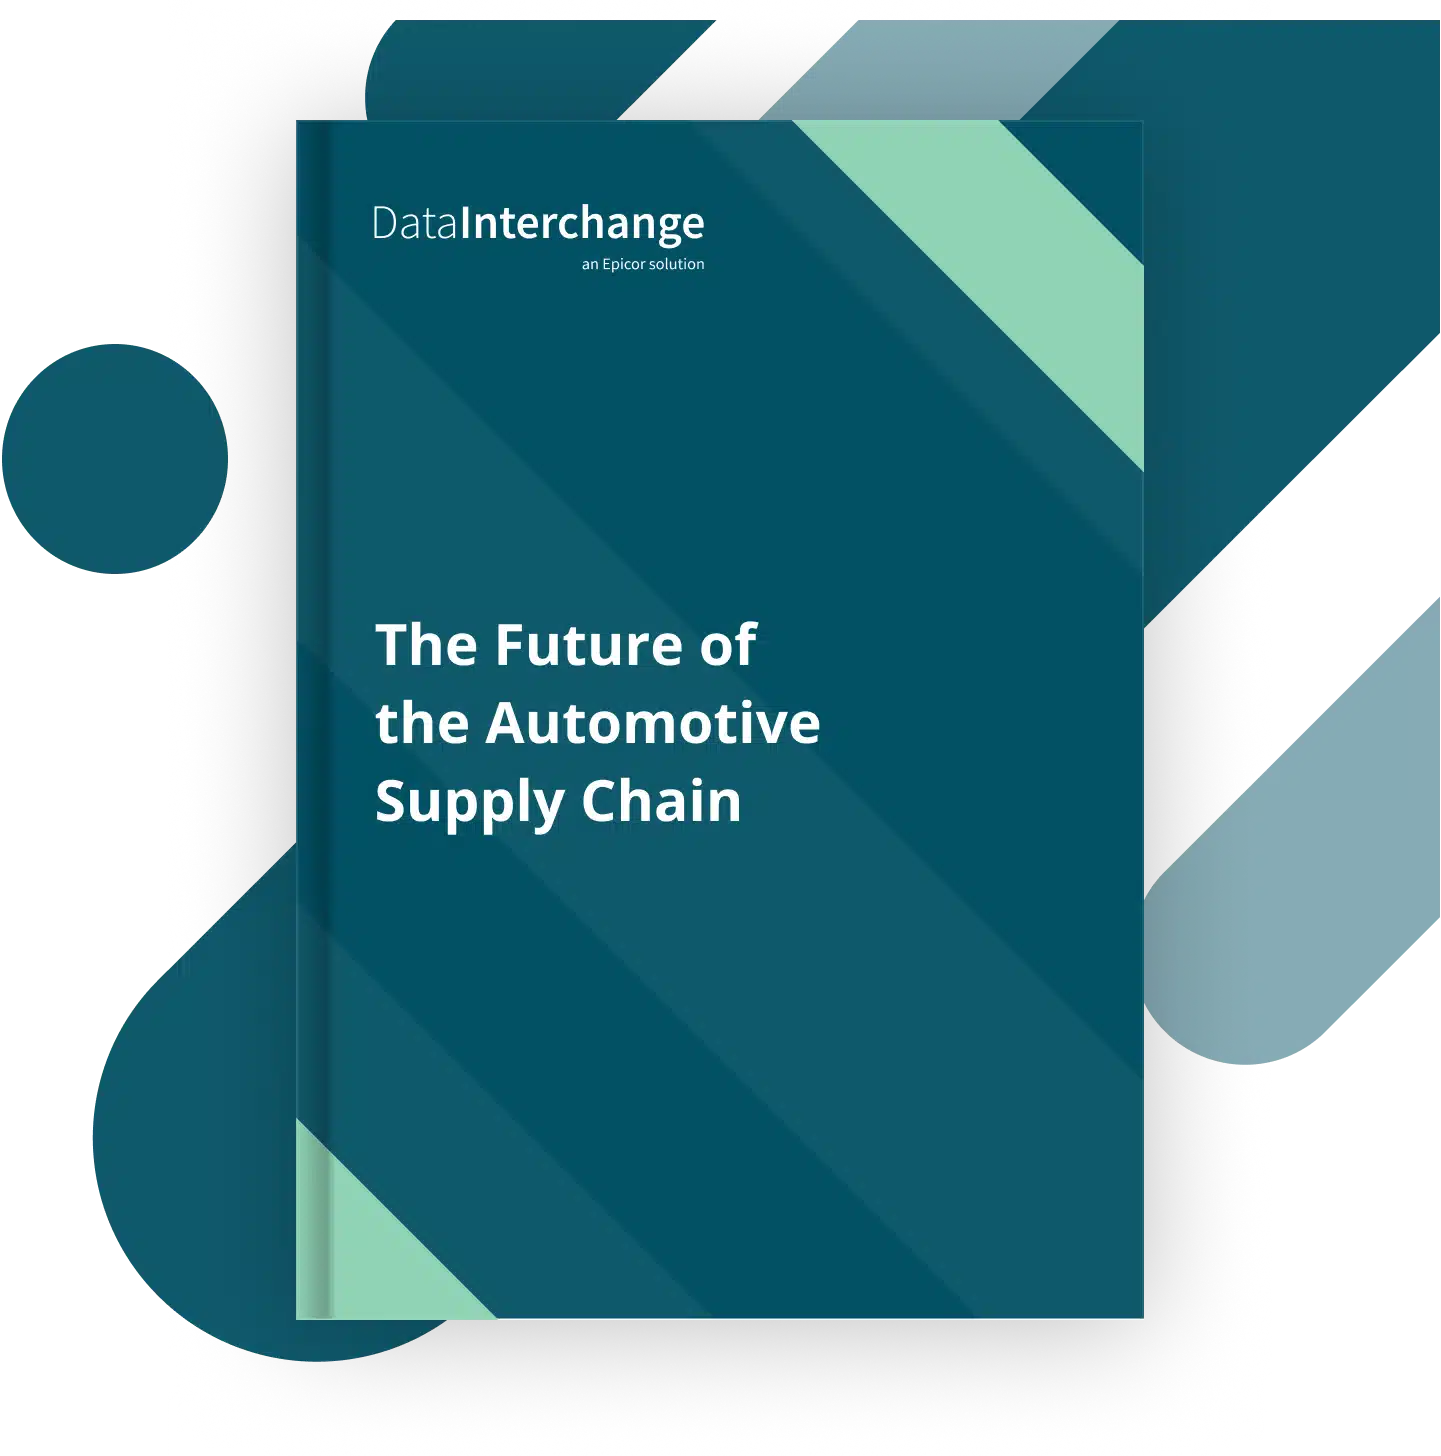 The Future of the Automotive Supply Chain